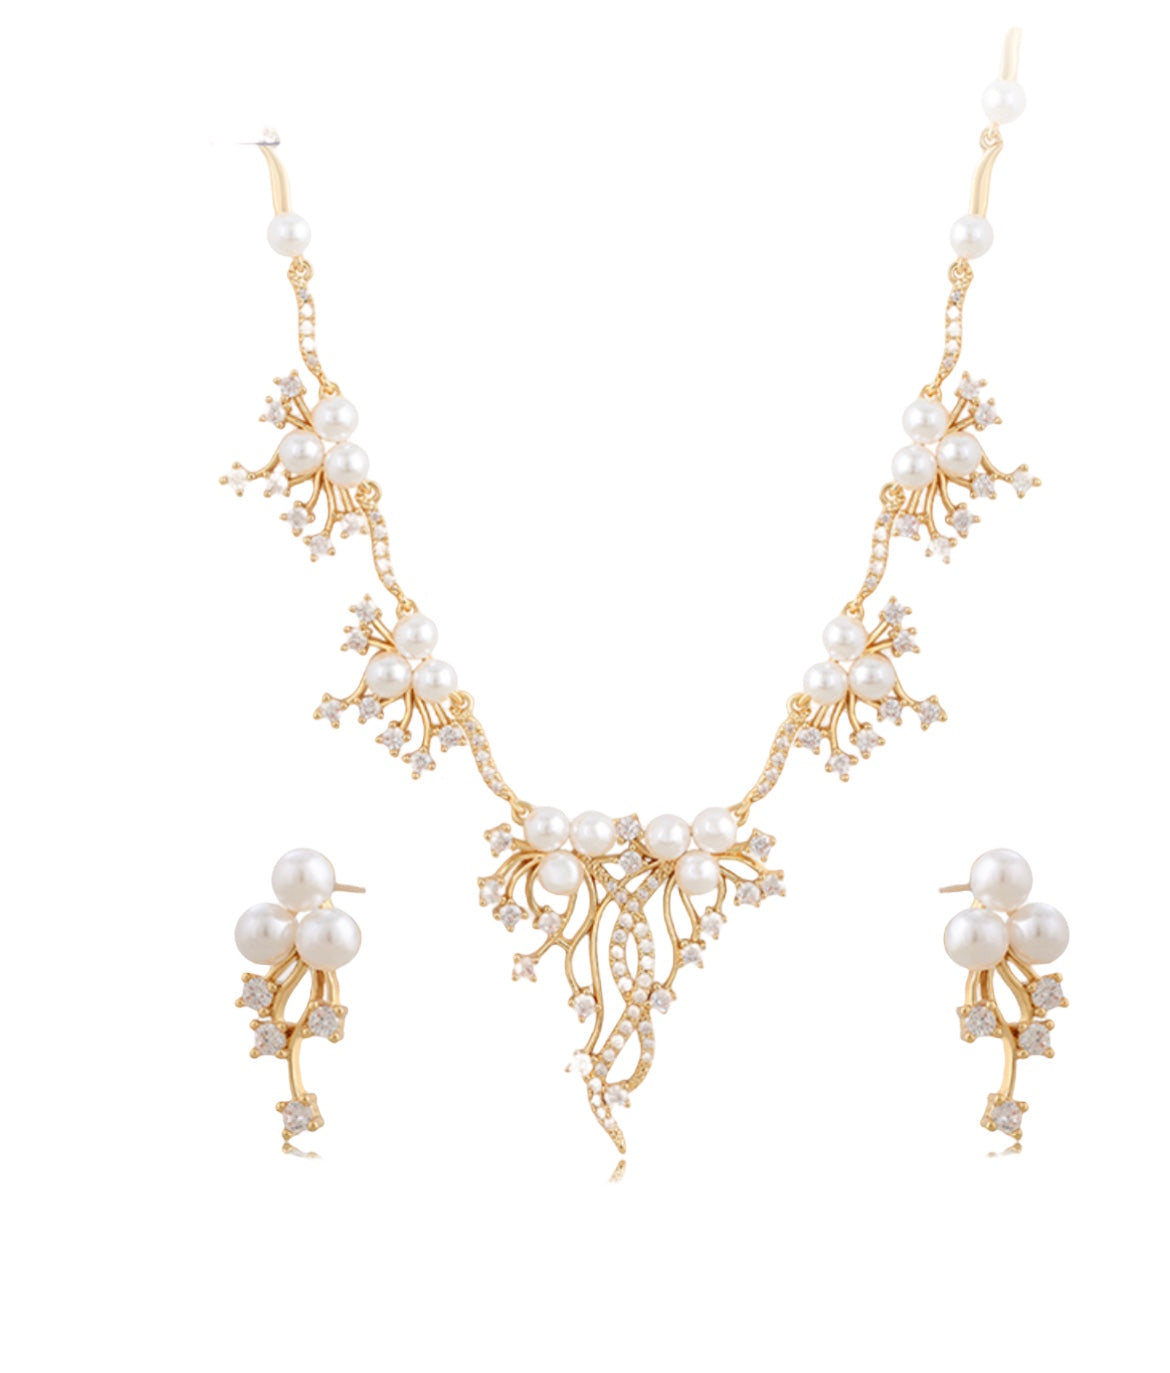 Timeless Trio: 3 Pearls Earrings and Necklace Set – Effortless Elegance"